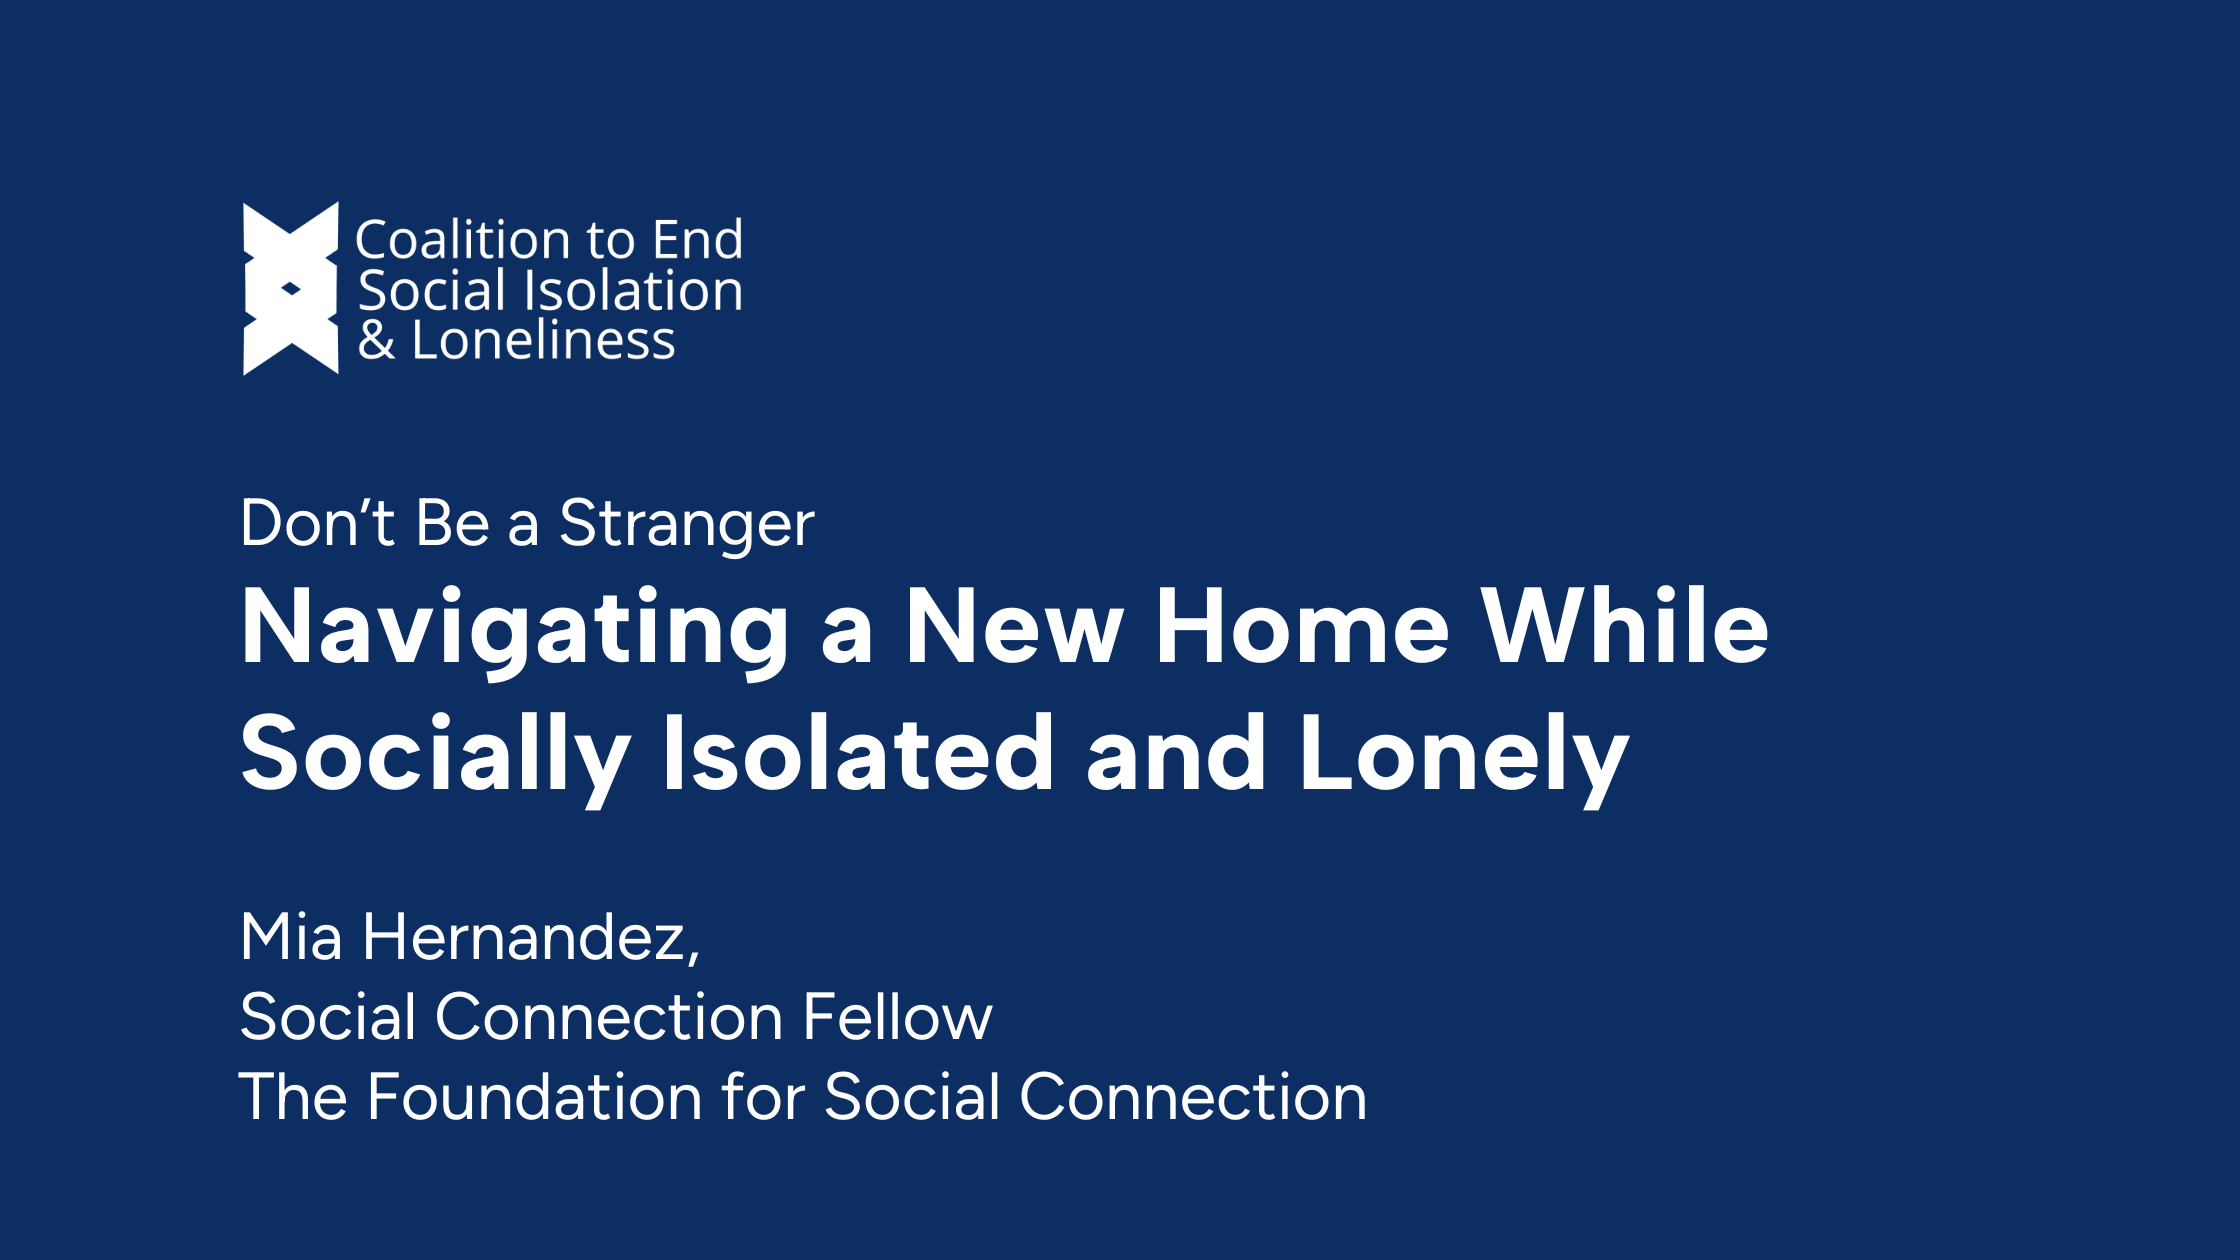 Don’t Be a Stranger: Navigating a New Home While Socially Isolated and Lonely